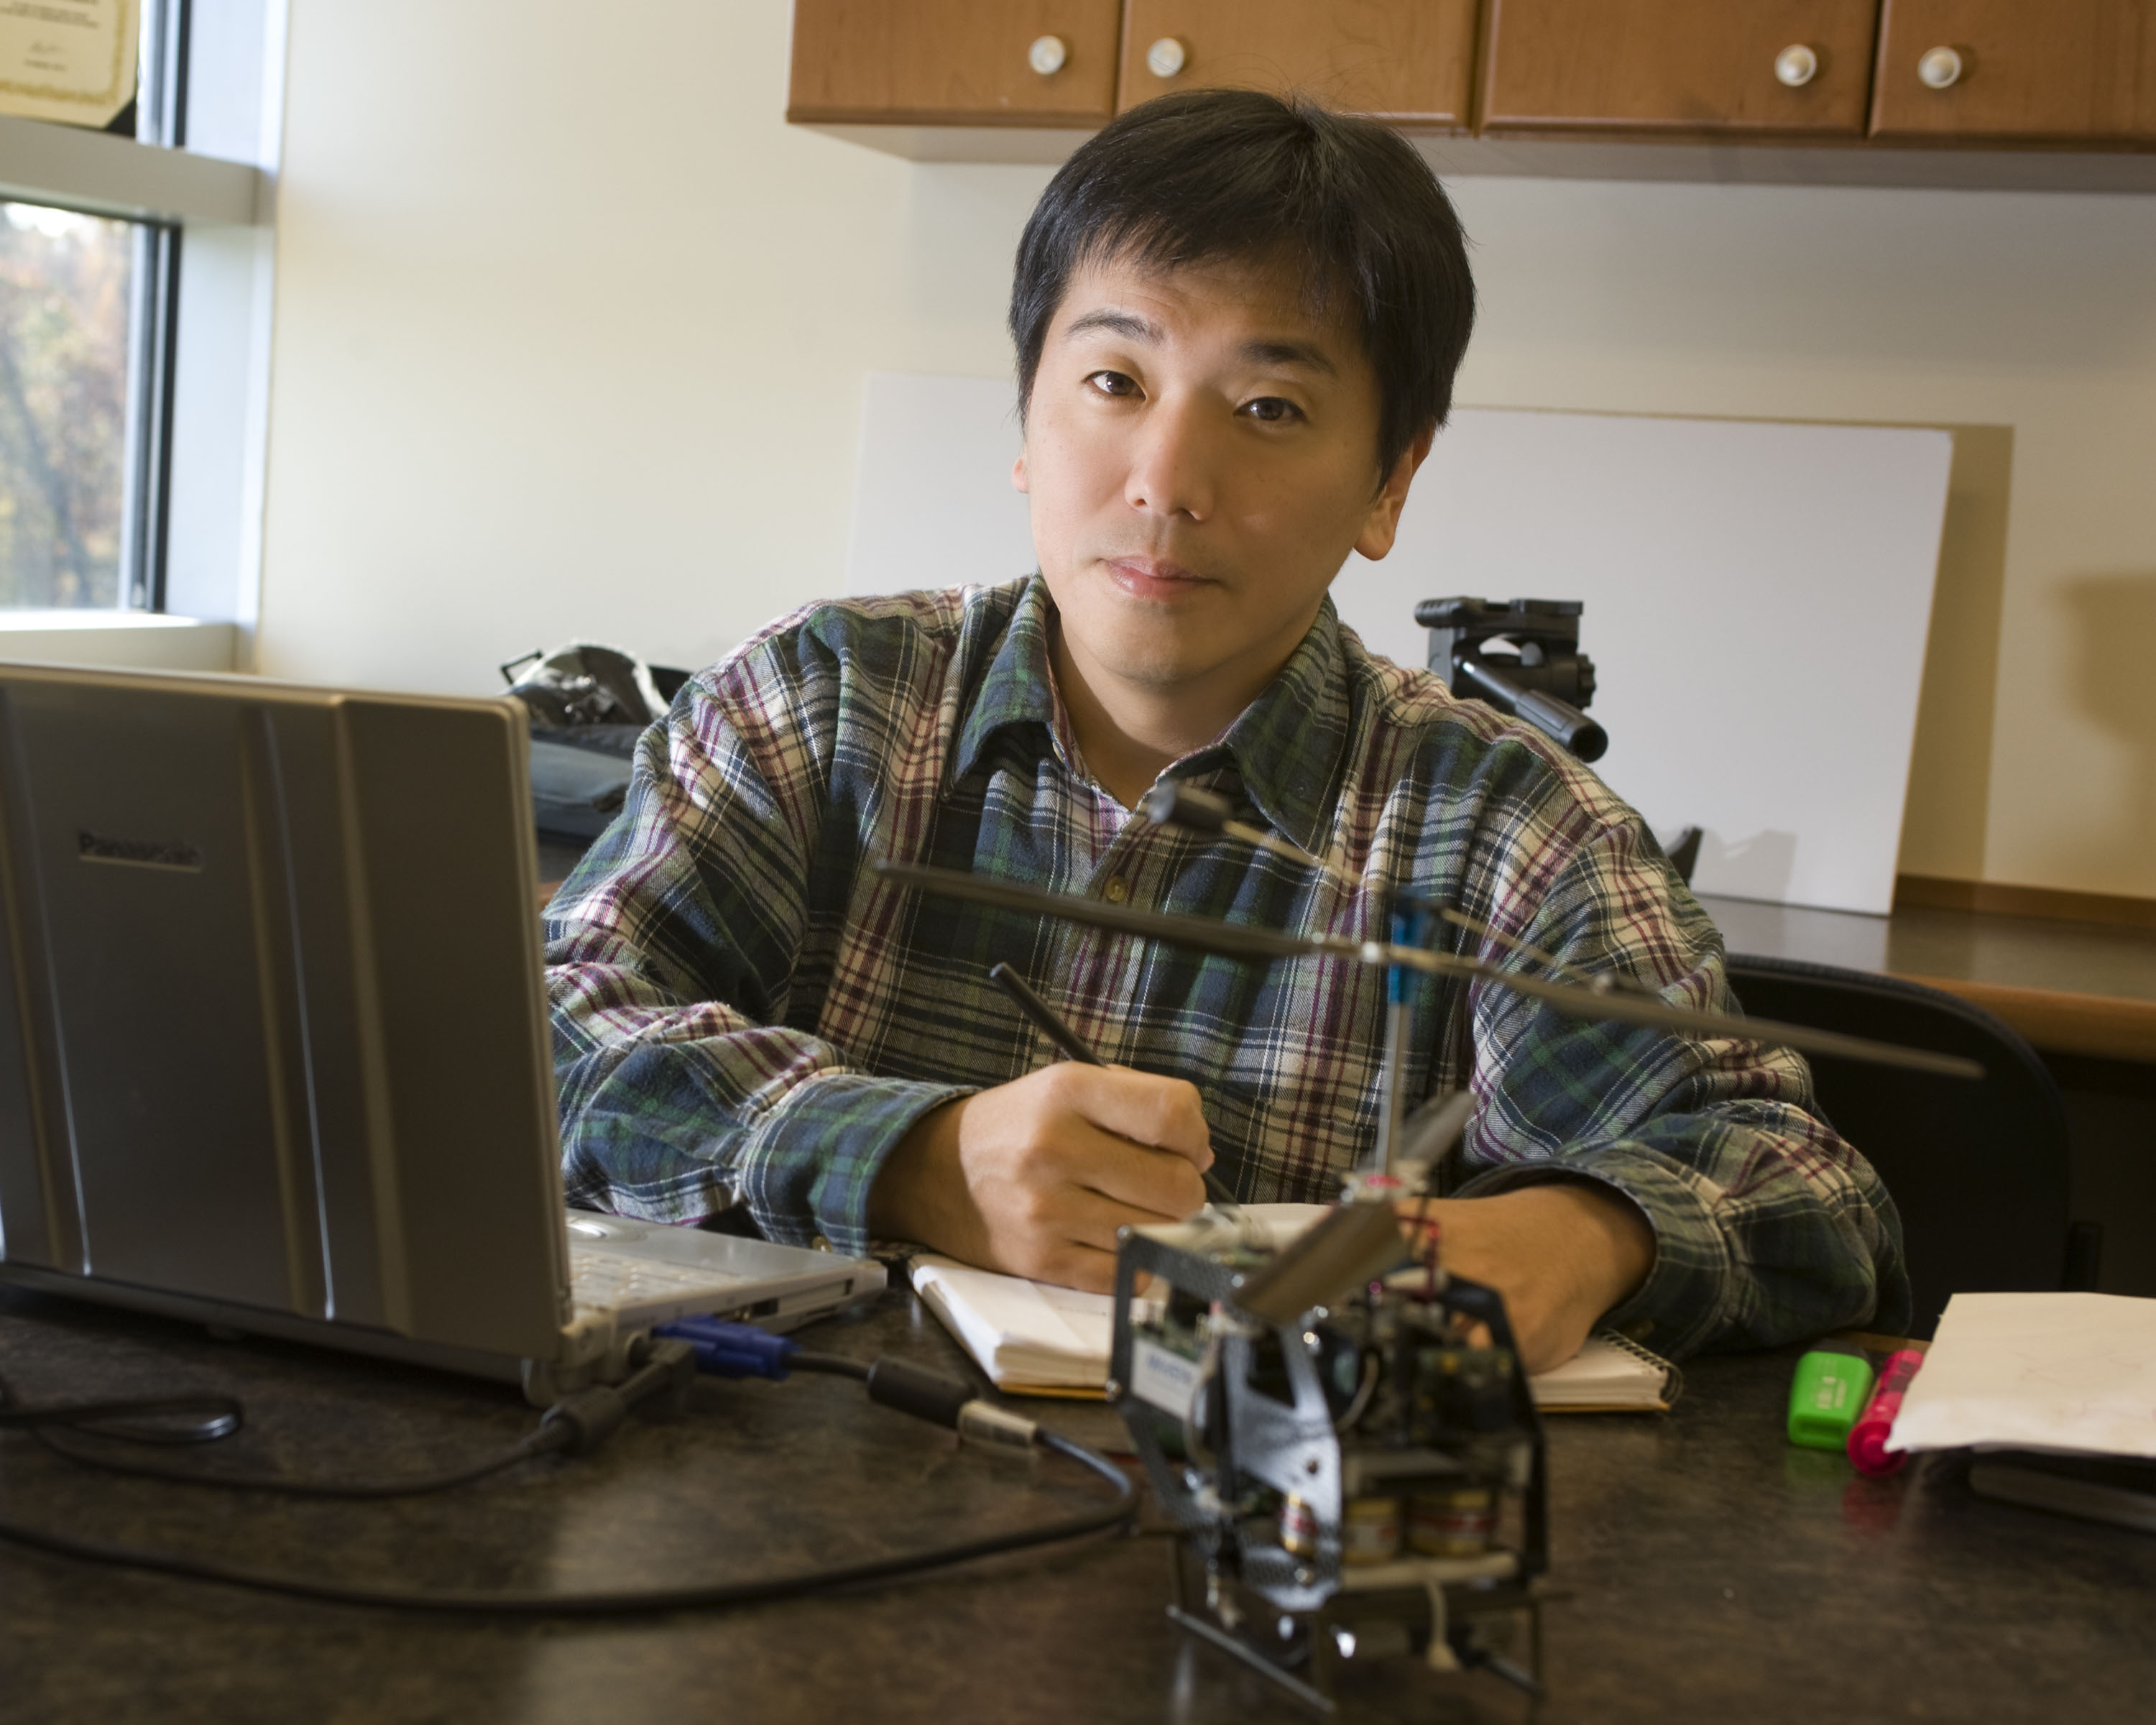 Tomonari Furukawa is leading a team of faculty, graduate students, and undergraduate students from Virginia Tech's Virginia Center for Autonomous Systems in building a team battle-ready robots as part of an international war games challenge.